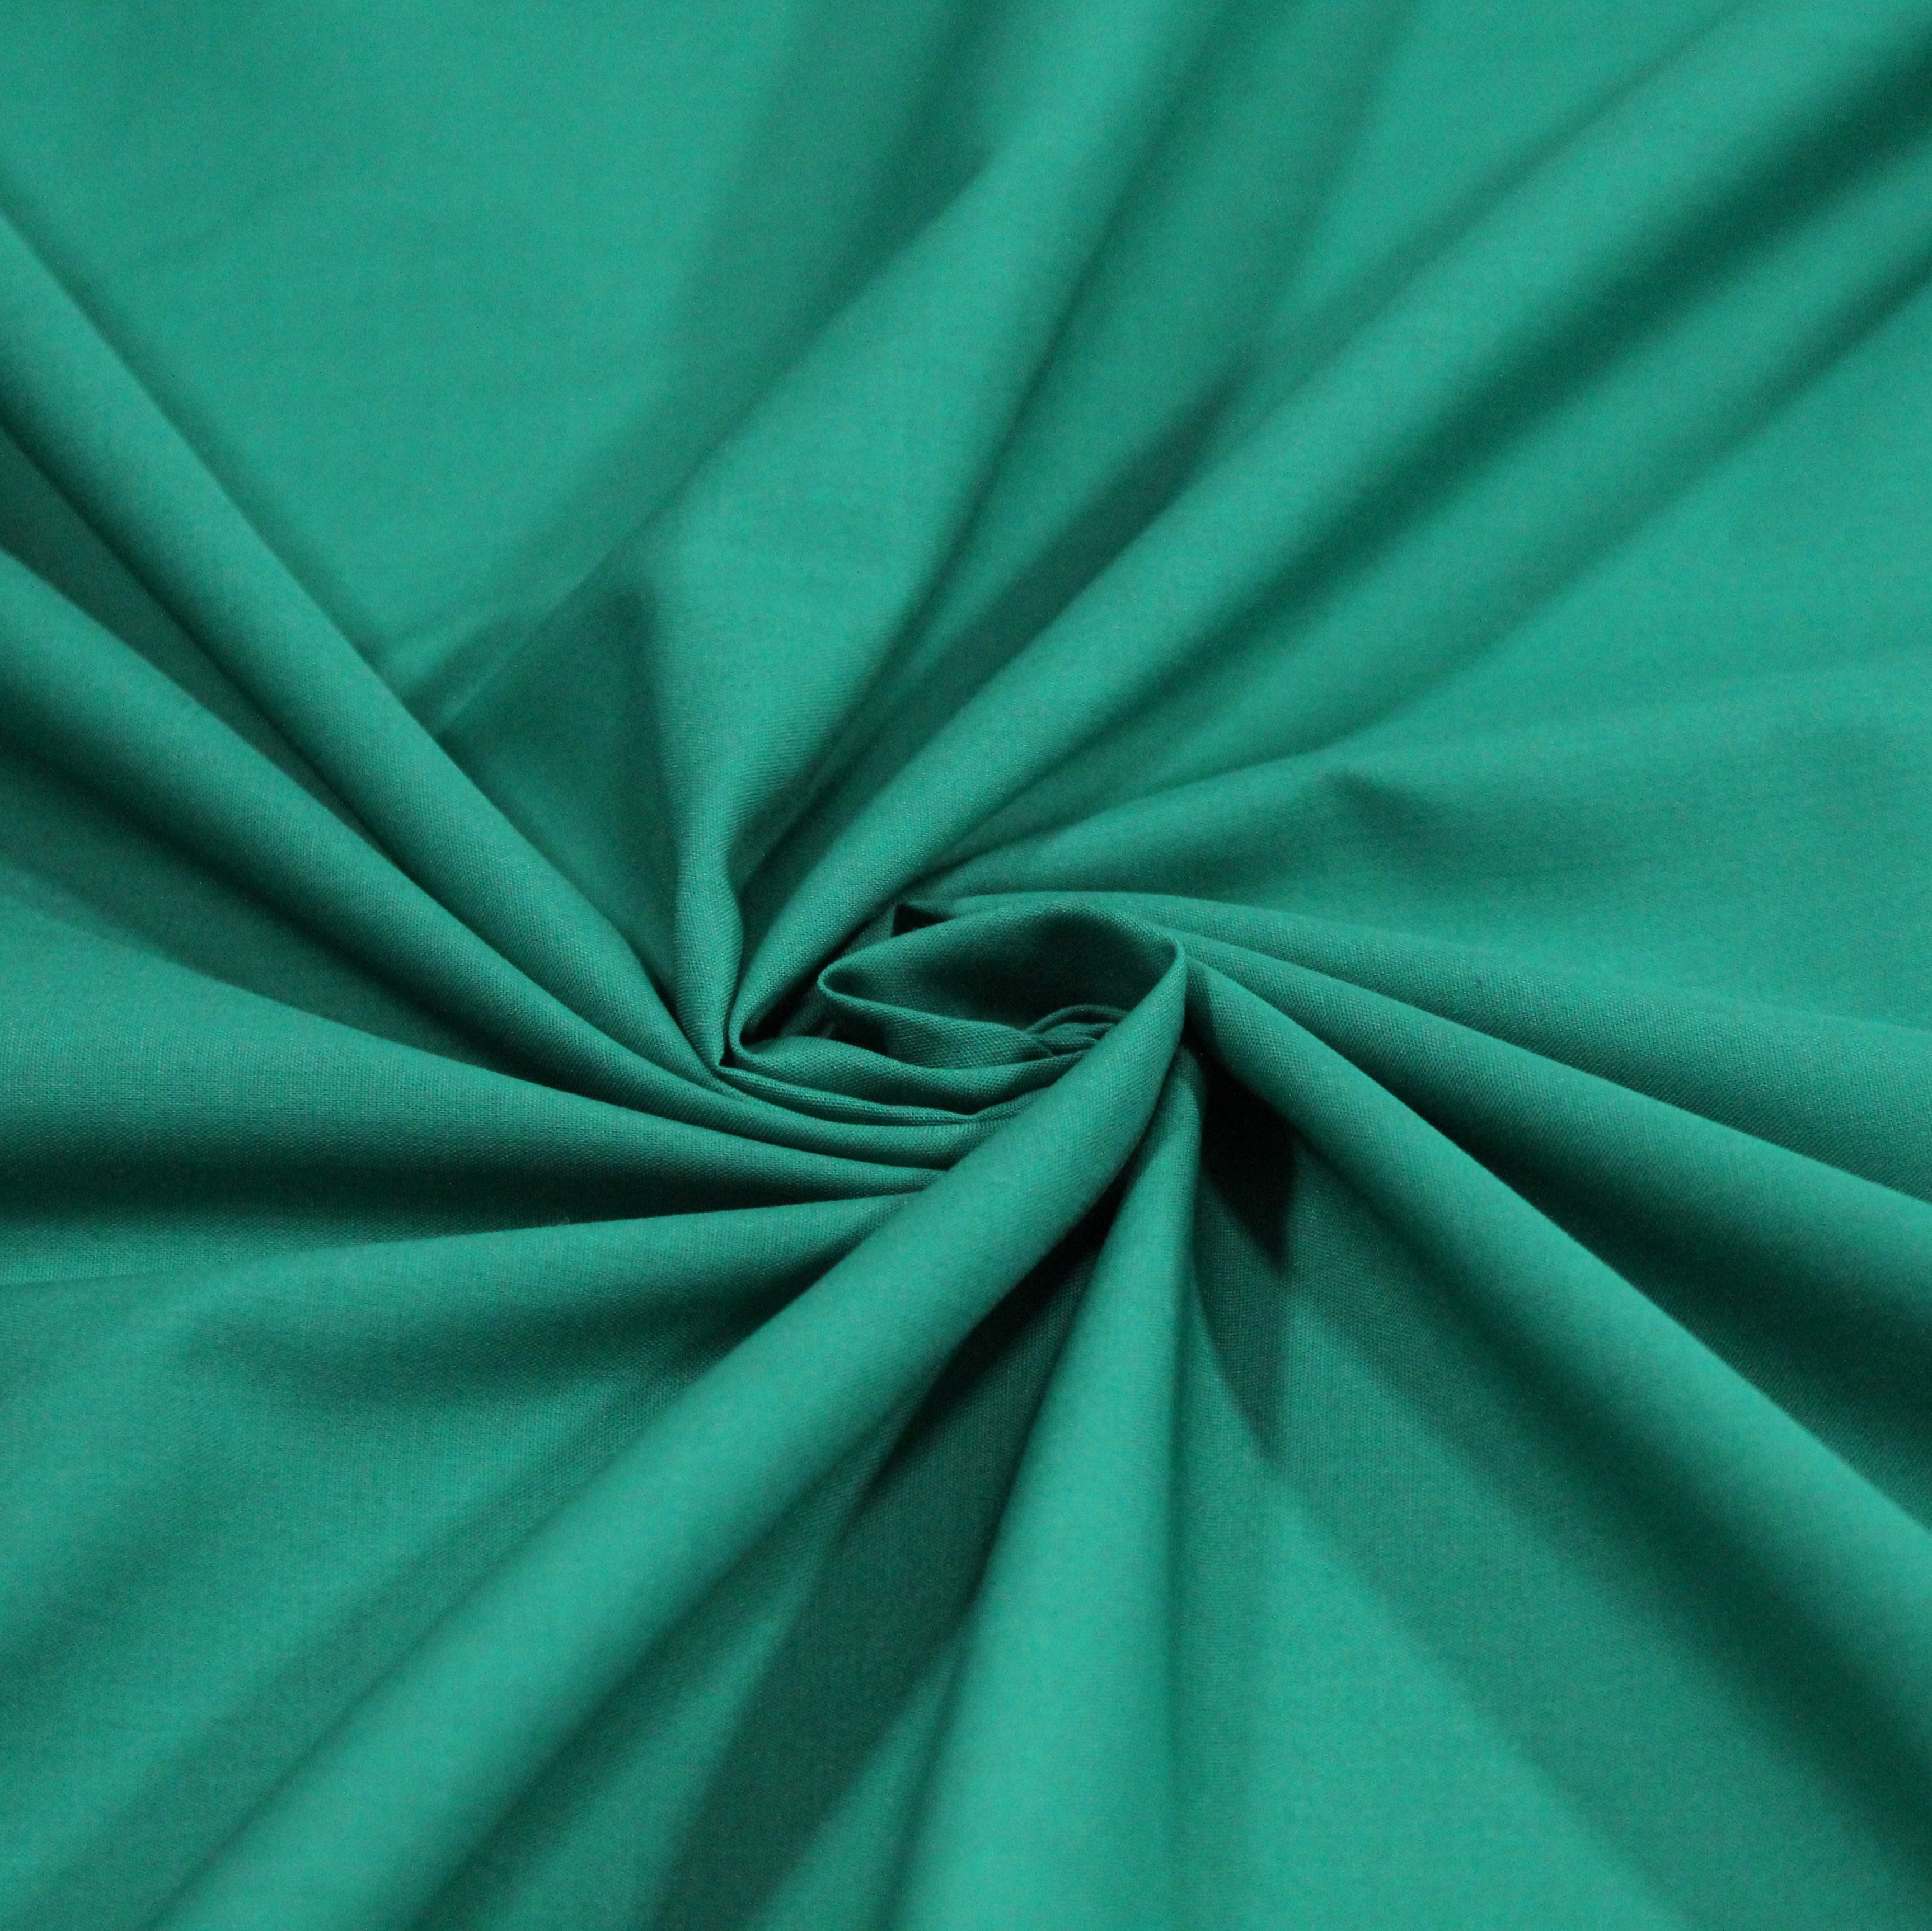 3 Metres For £5, Premium Plain Polycotton Fabric, 60° Washable, 45" Wide, Variations Available